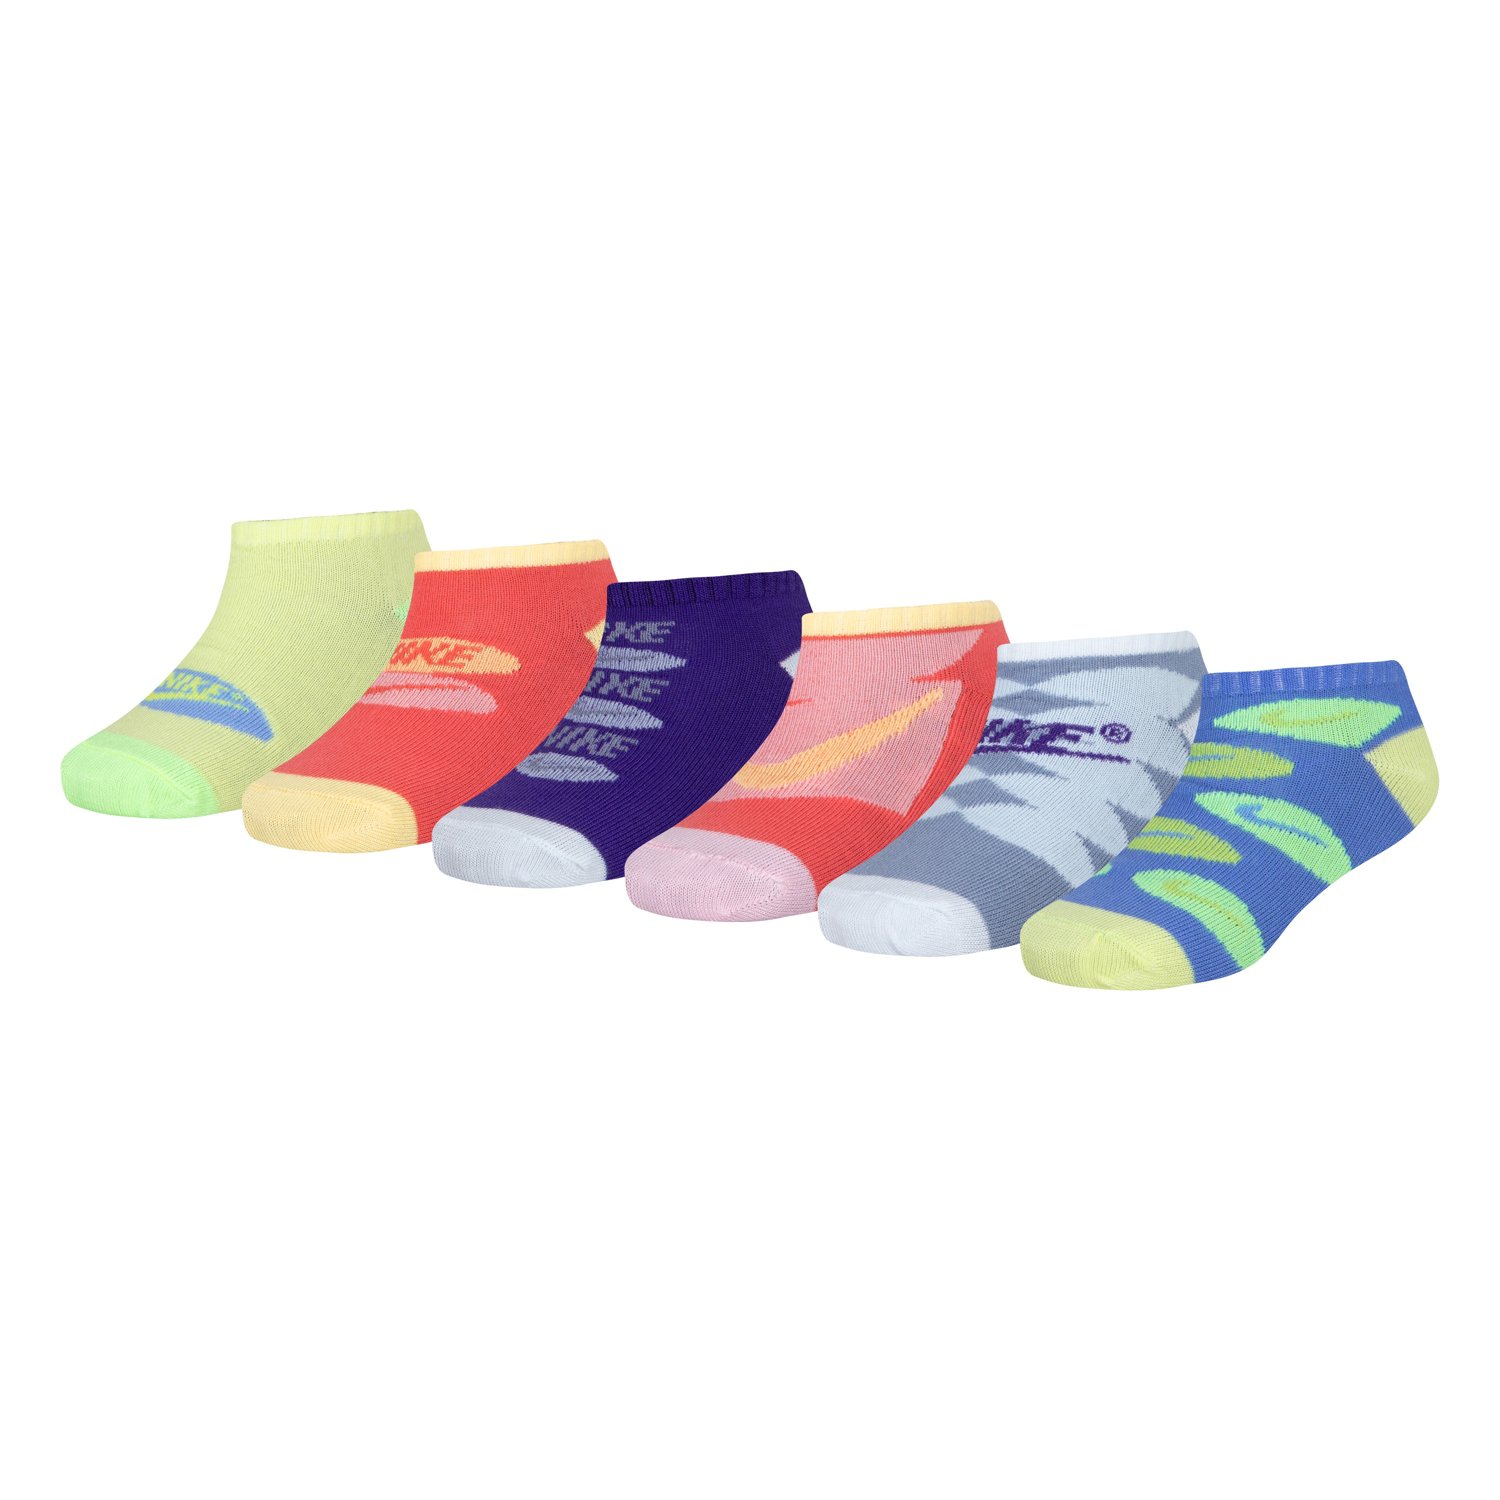 Nike Girls' GFX Low-Cut Socks 6 Pack | Free Shipping at Academy